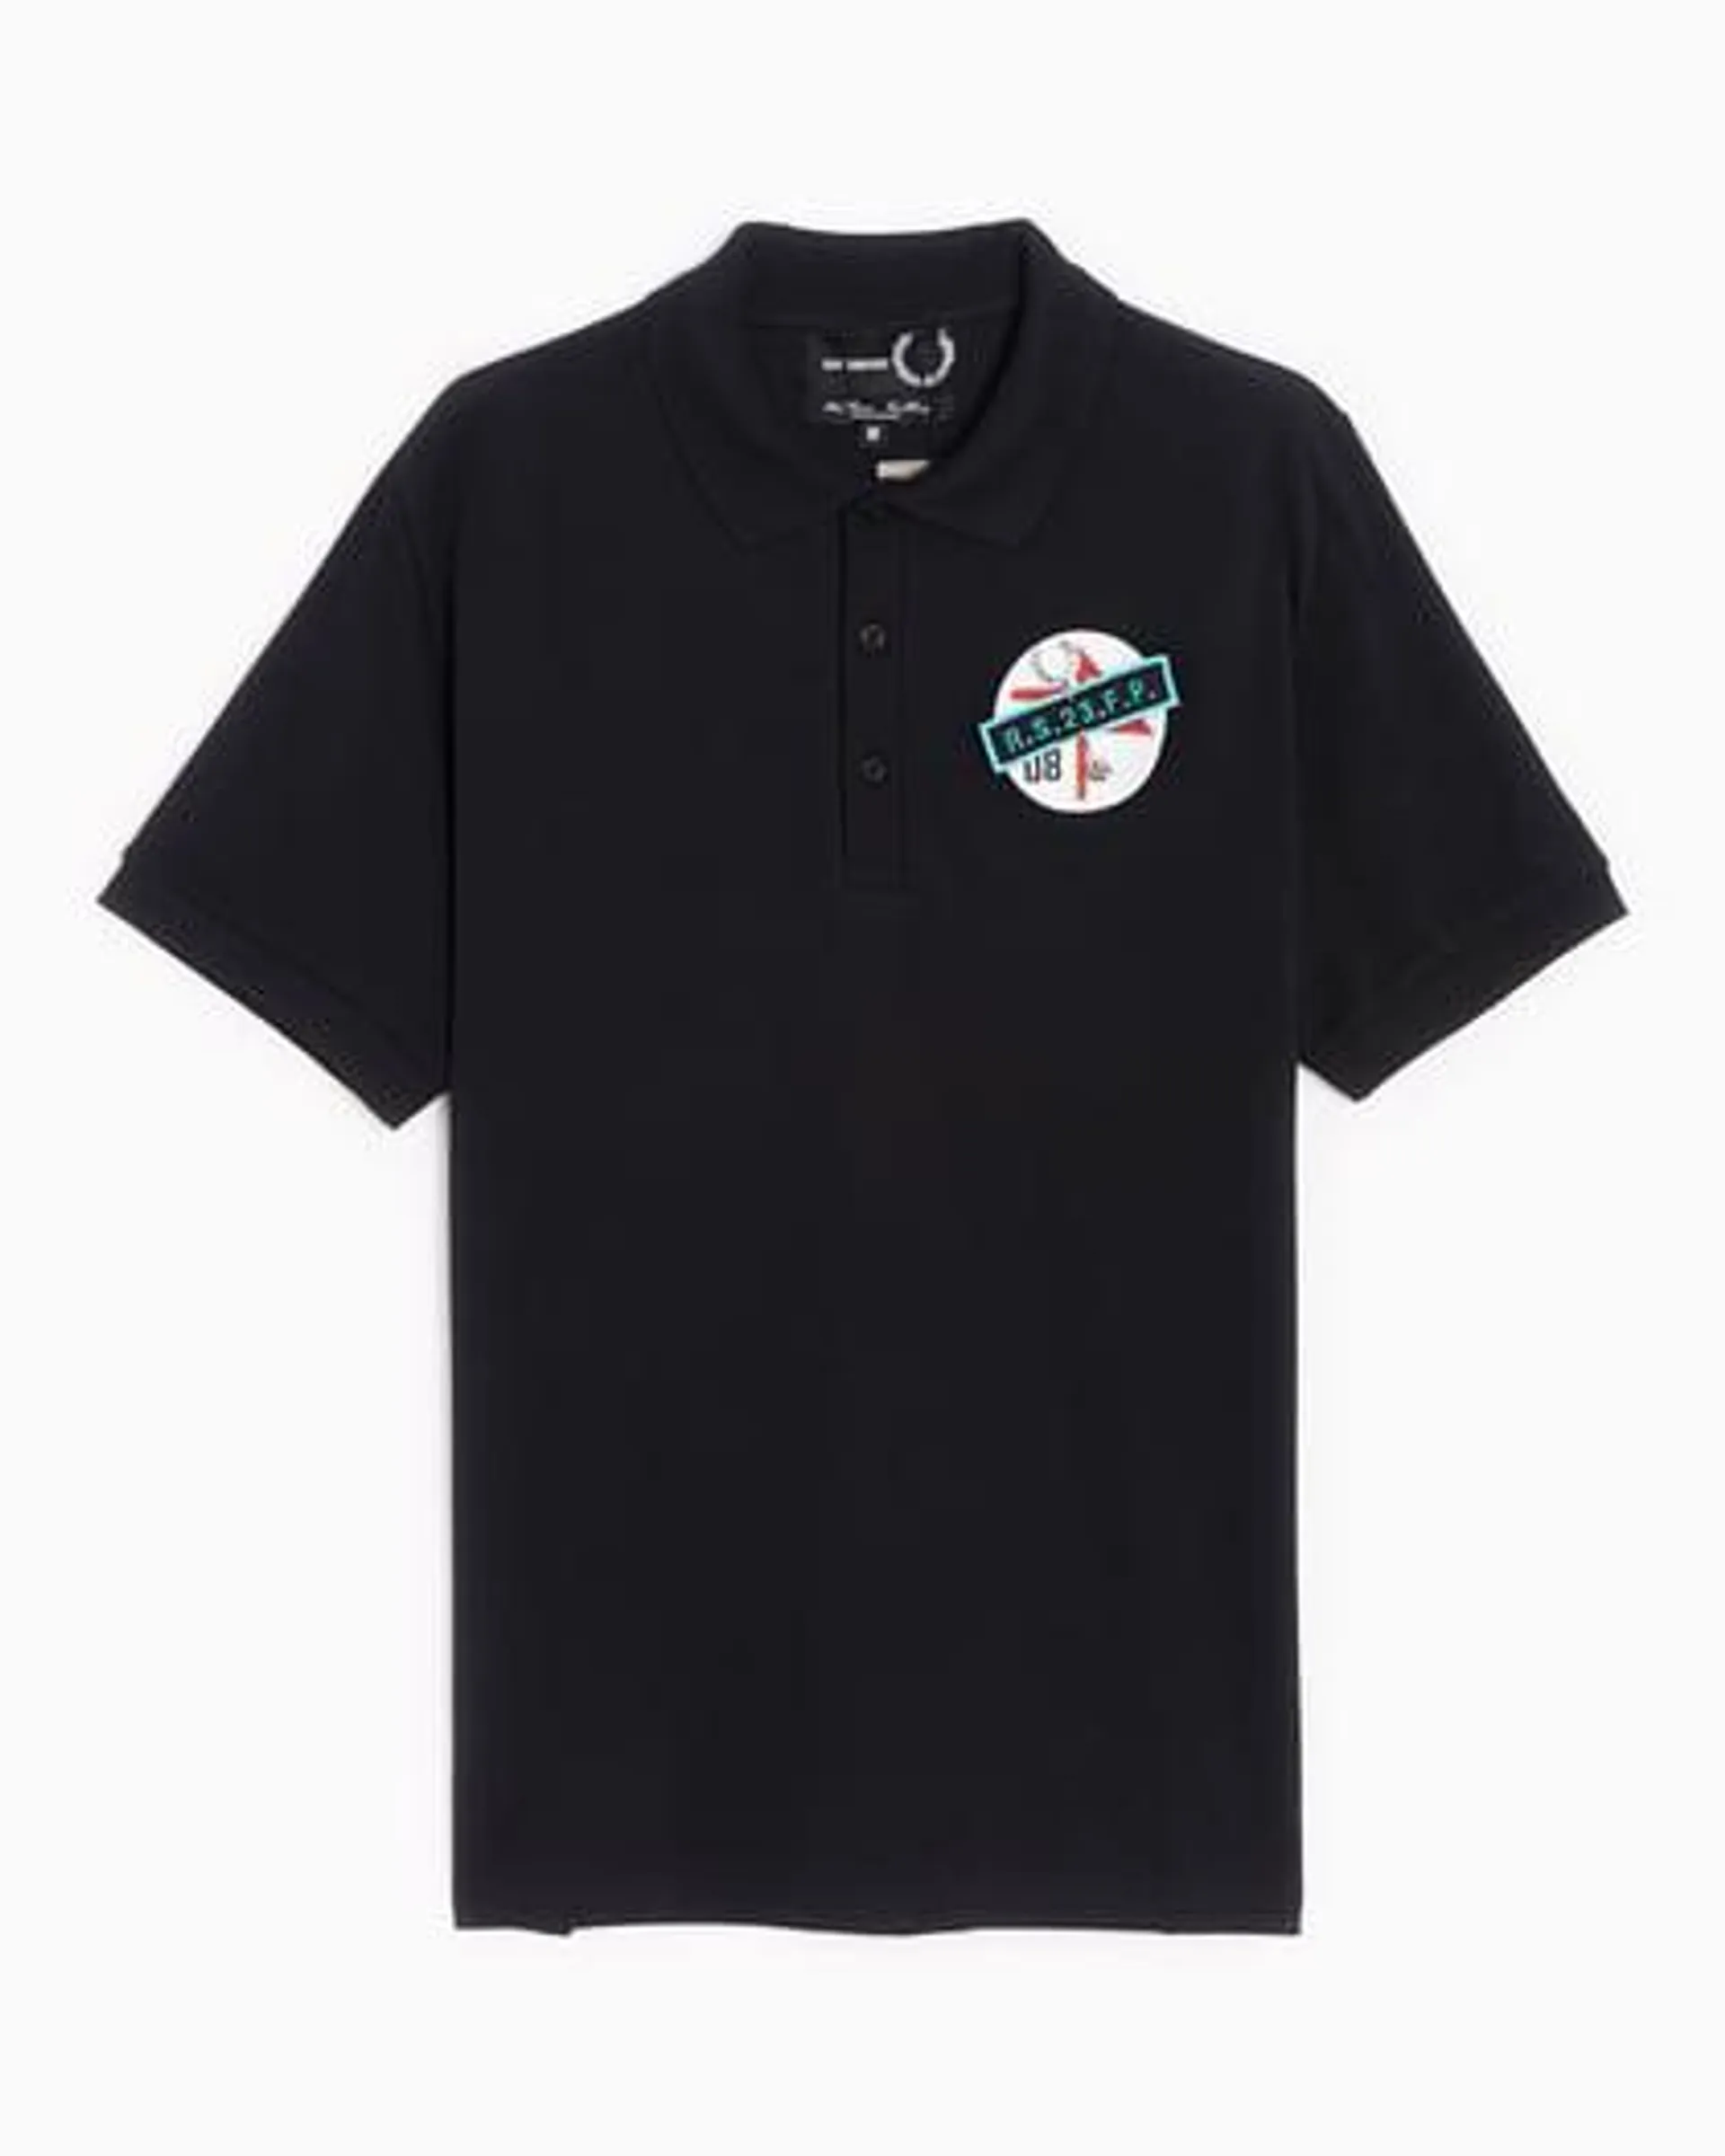 Fred Perry x Raf Simons Patched Men's Short Sleeve Polo